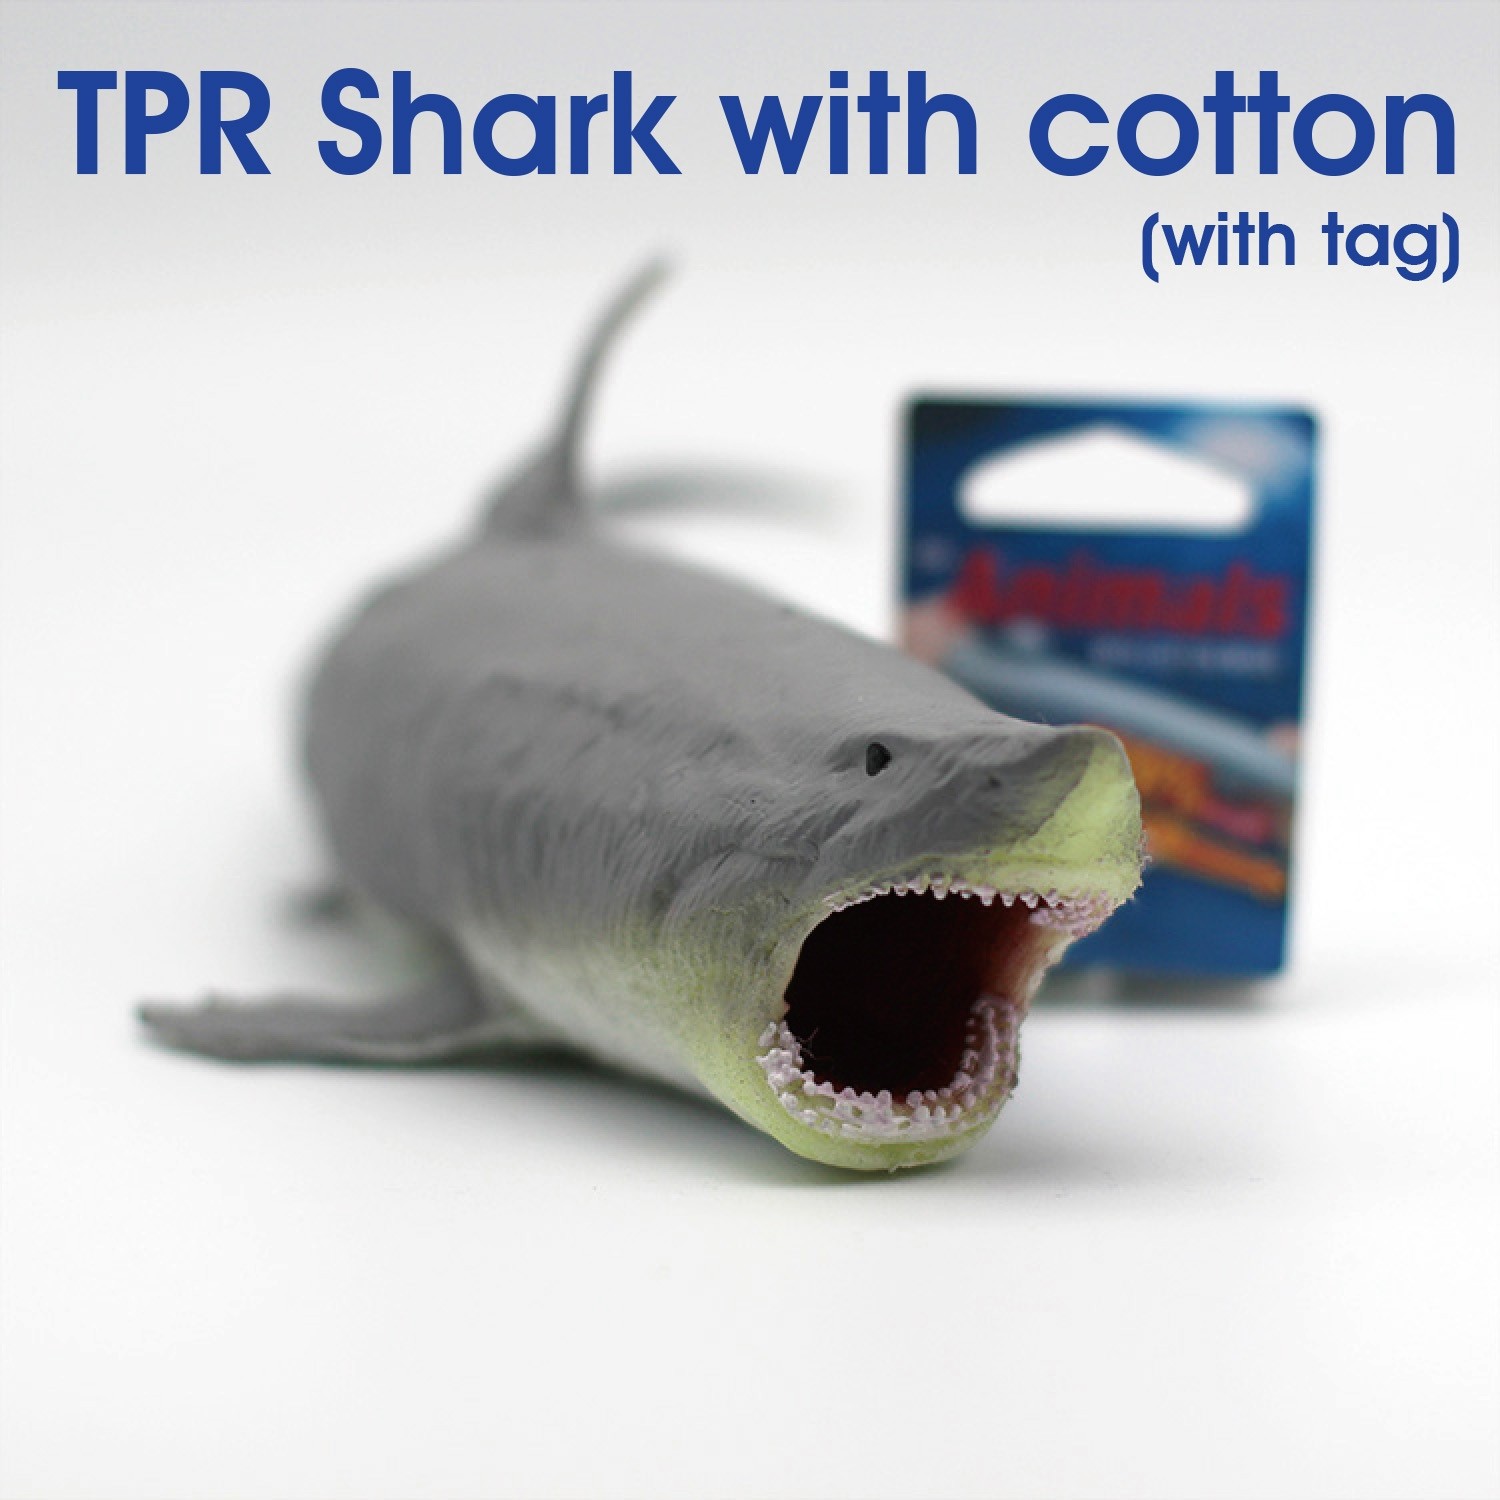 TPR Shark with cotton with tag